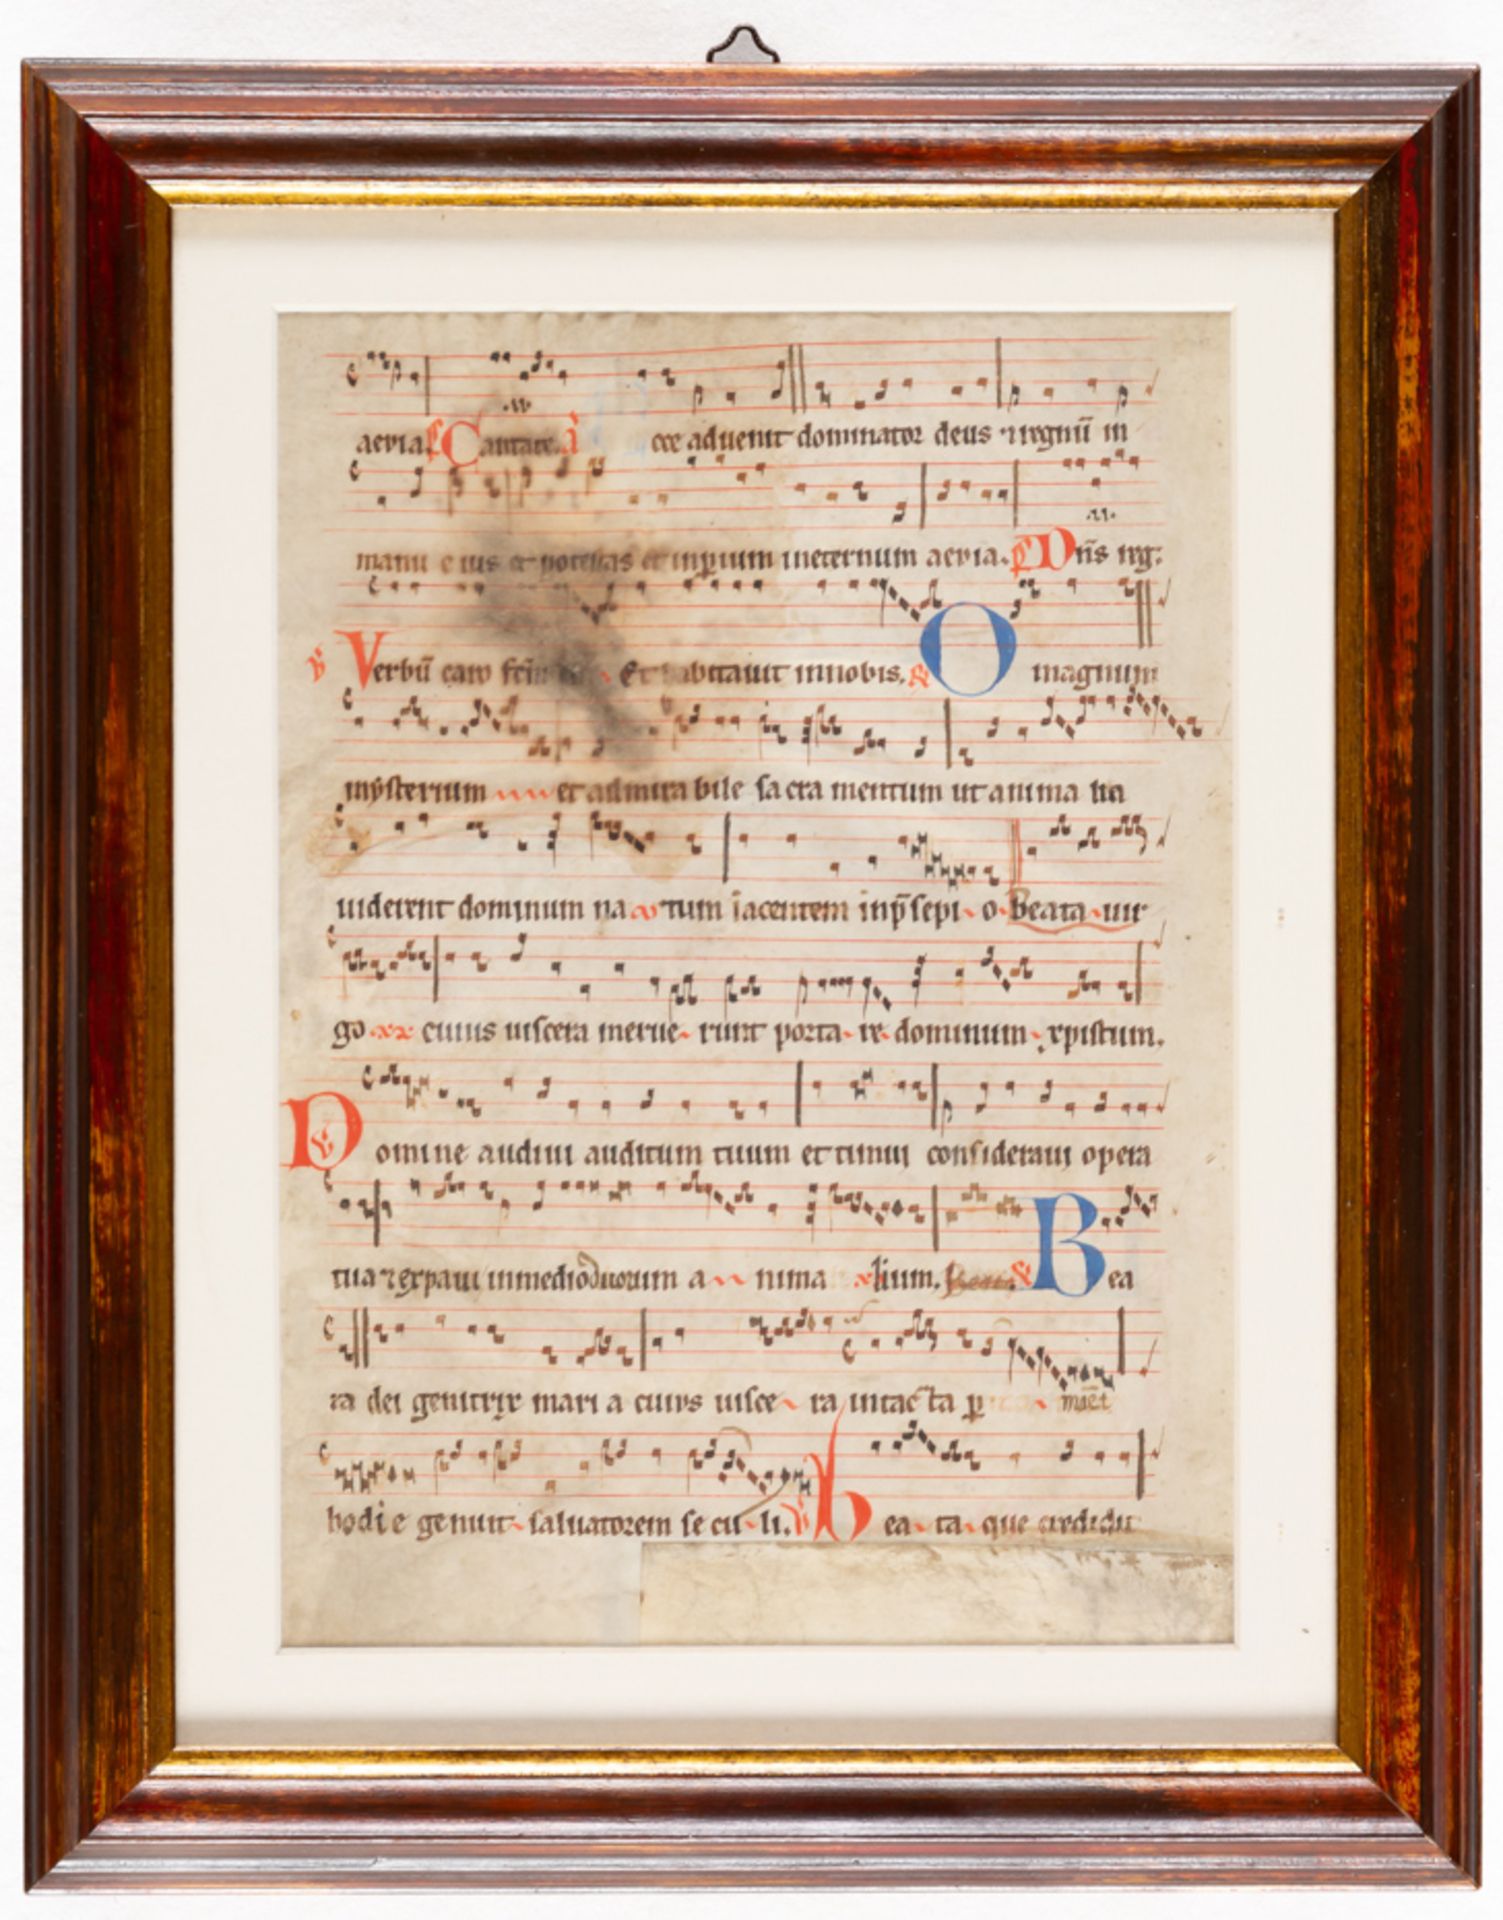 EARLY CHORAL MANUSCRIPT